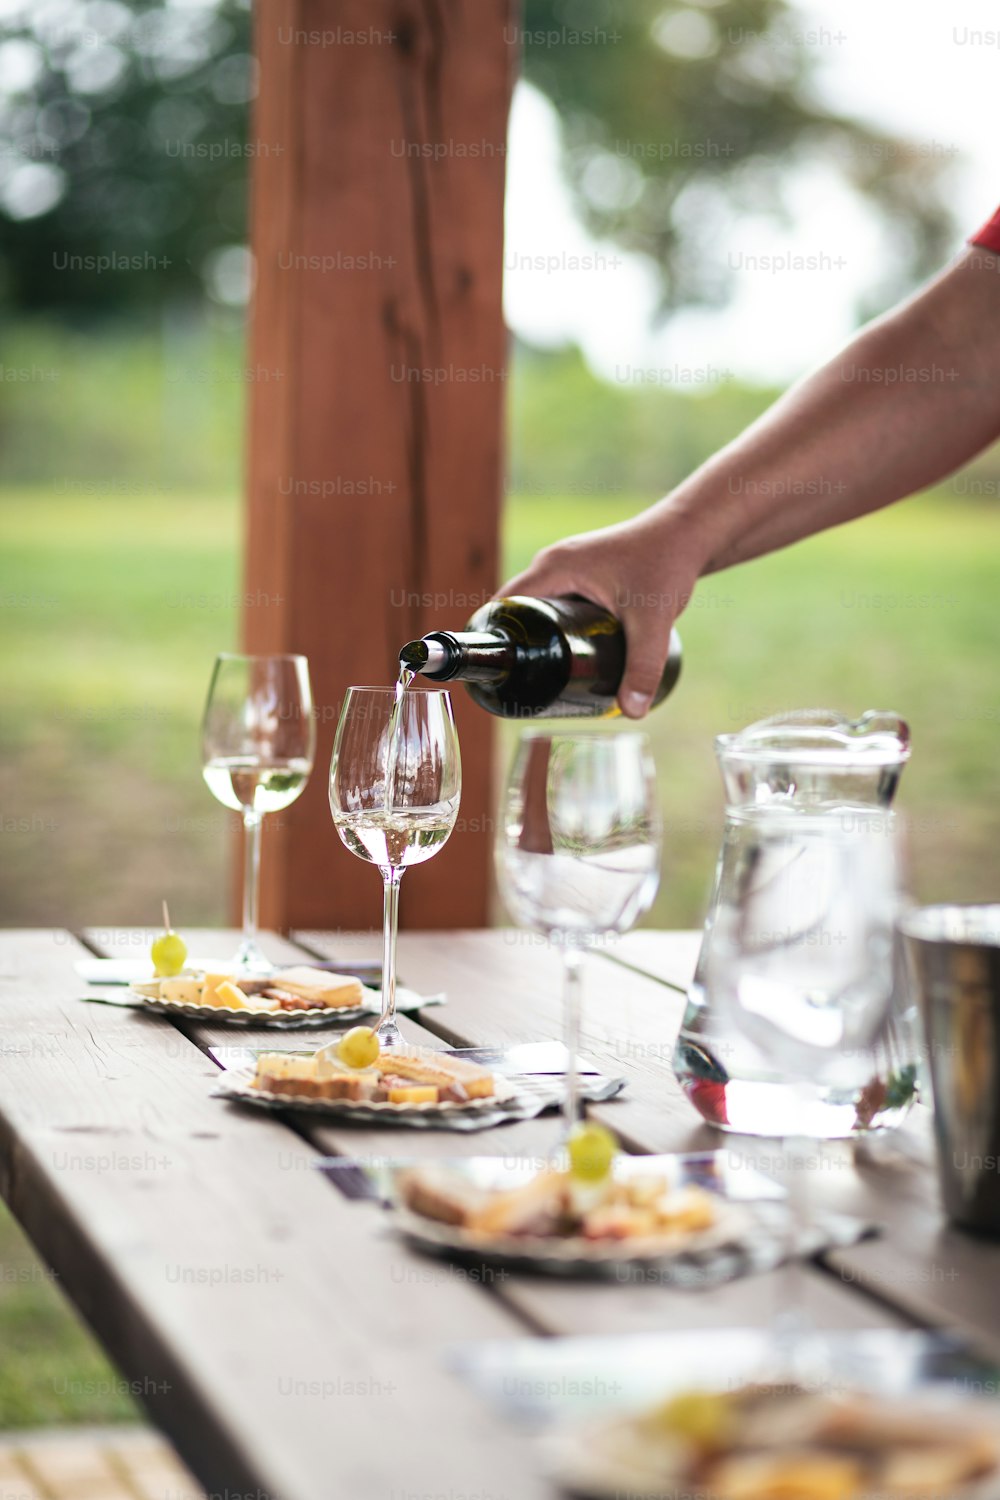 a person pouring a bottle of wine over a plate of food